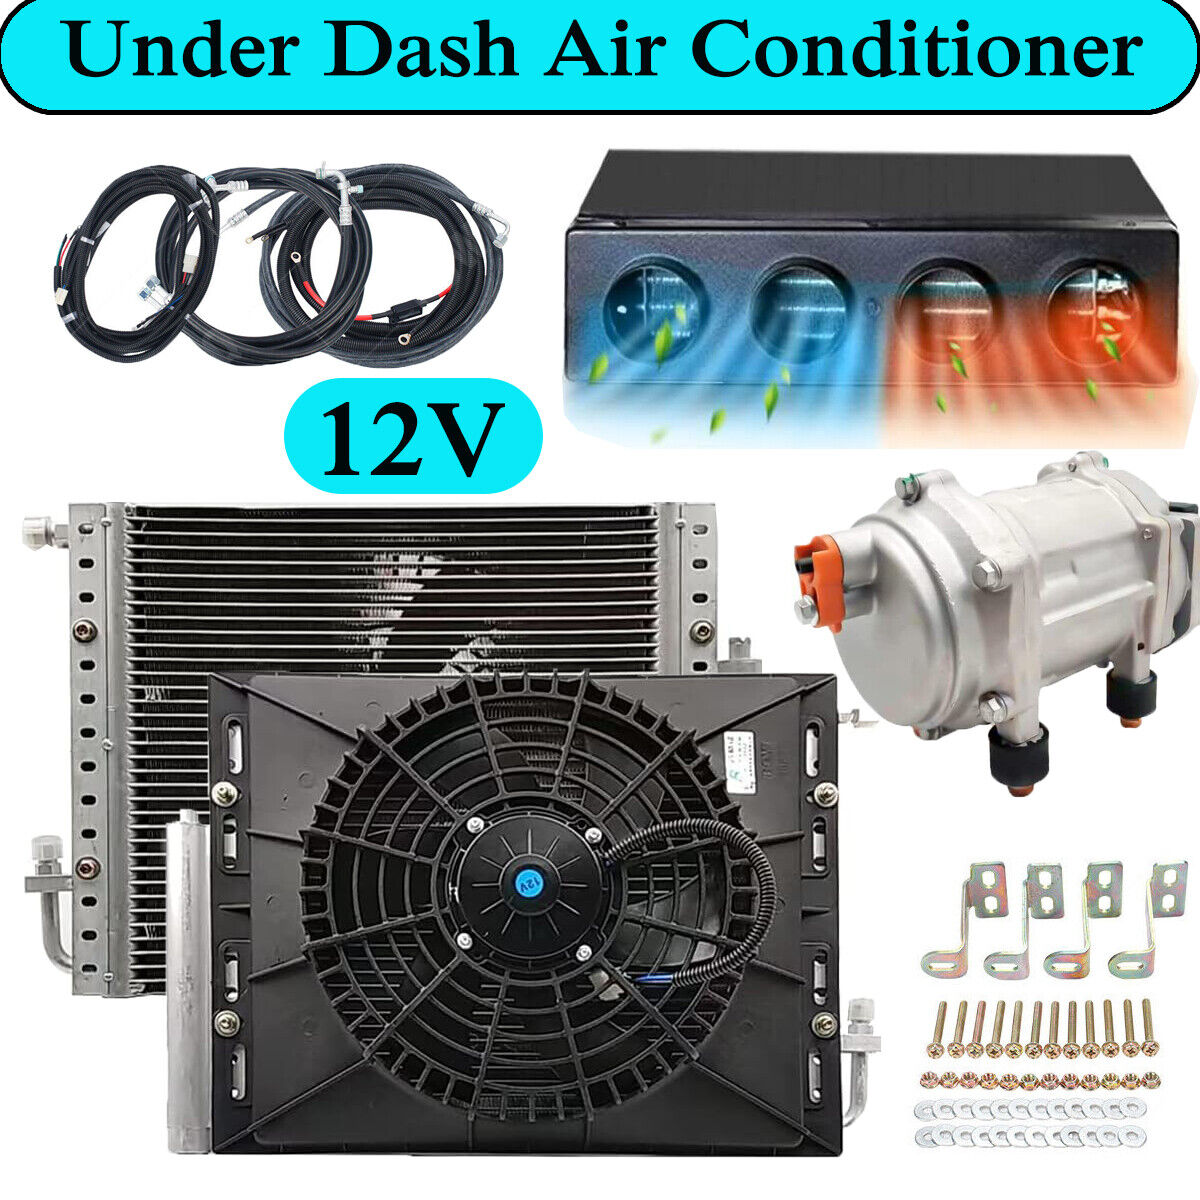 12V Universal A/C Kit Truck Cab Bus Air Conditioner Underdash 4 Vents Heat&Cool